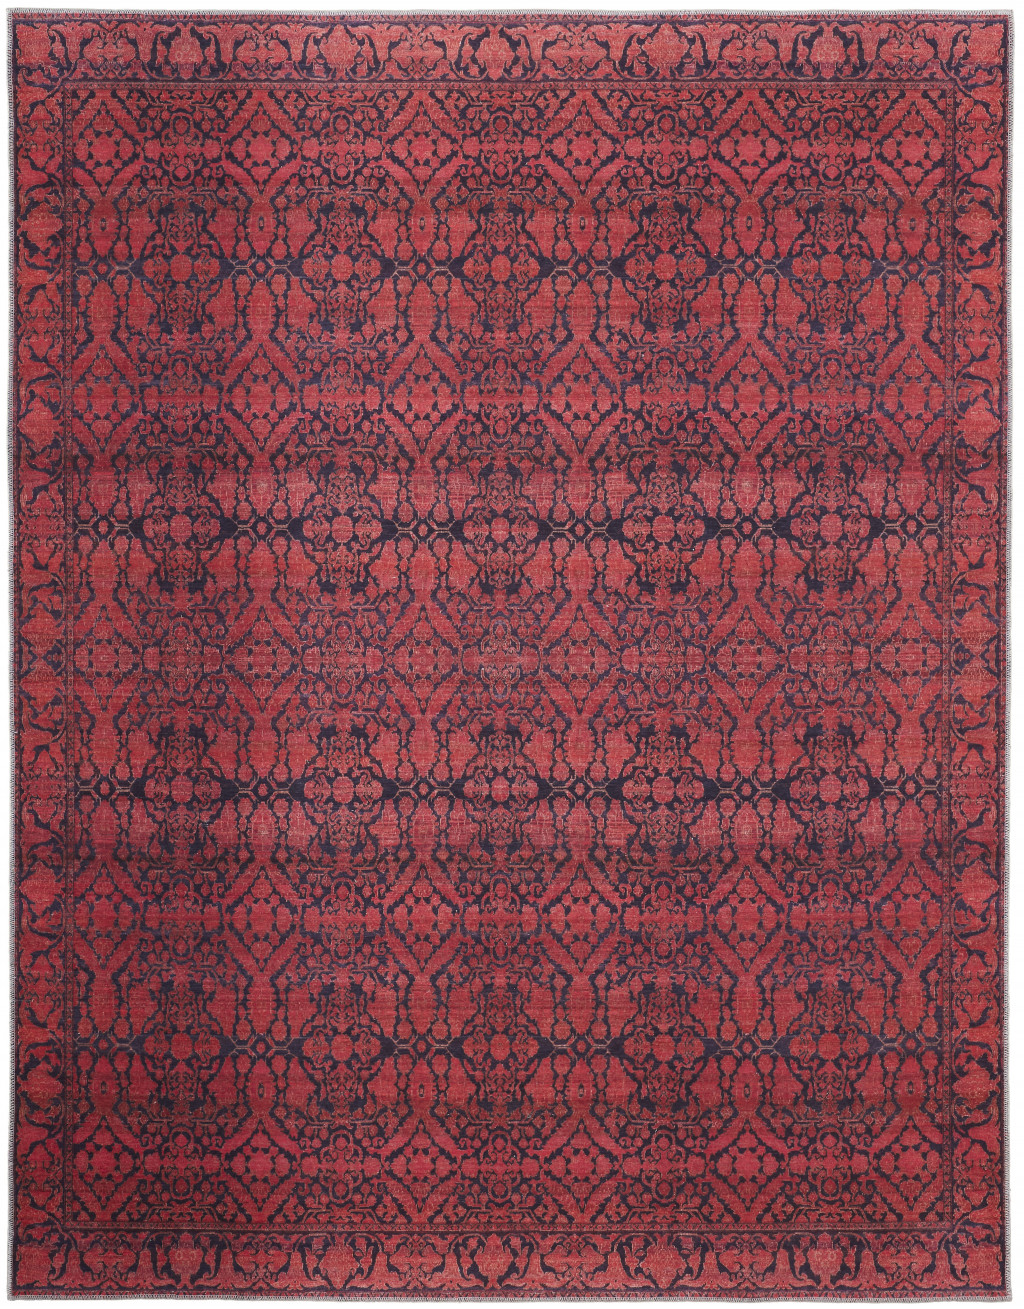 9' X 12' Red And Black Floral Power Loom Area Rug-515199-1